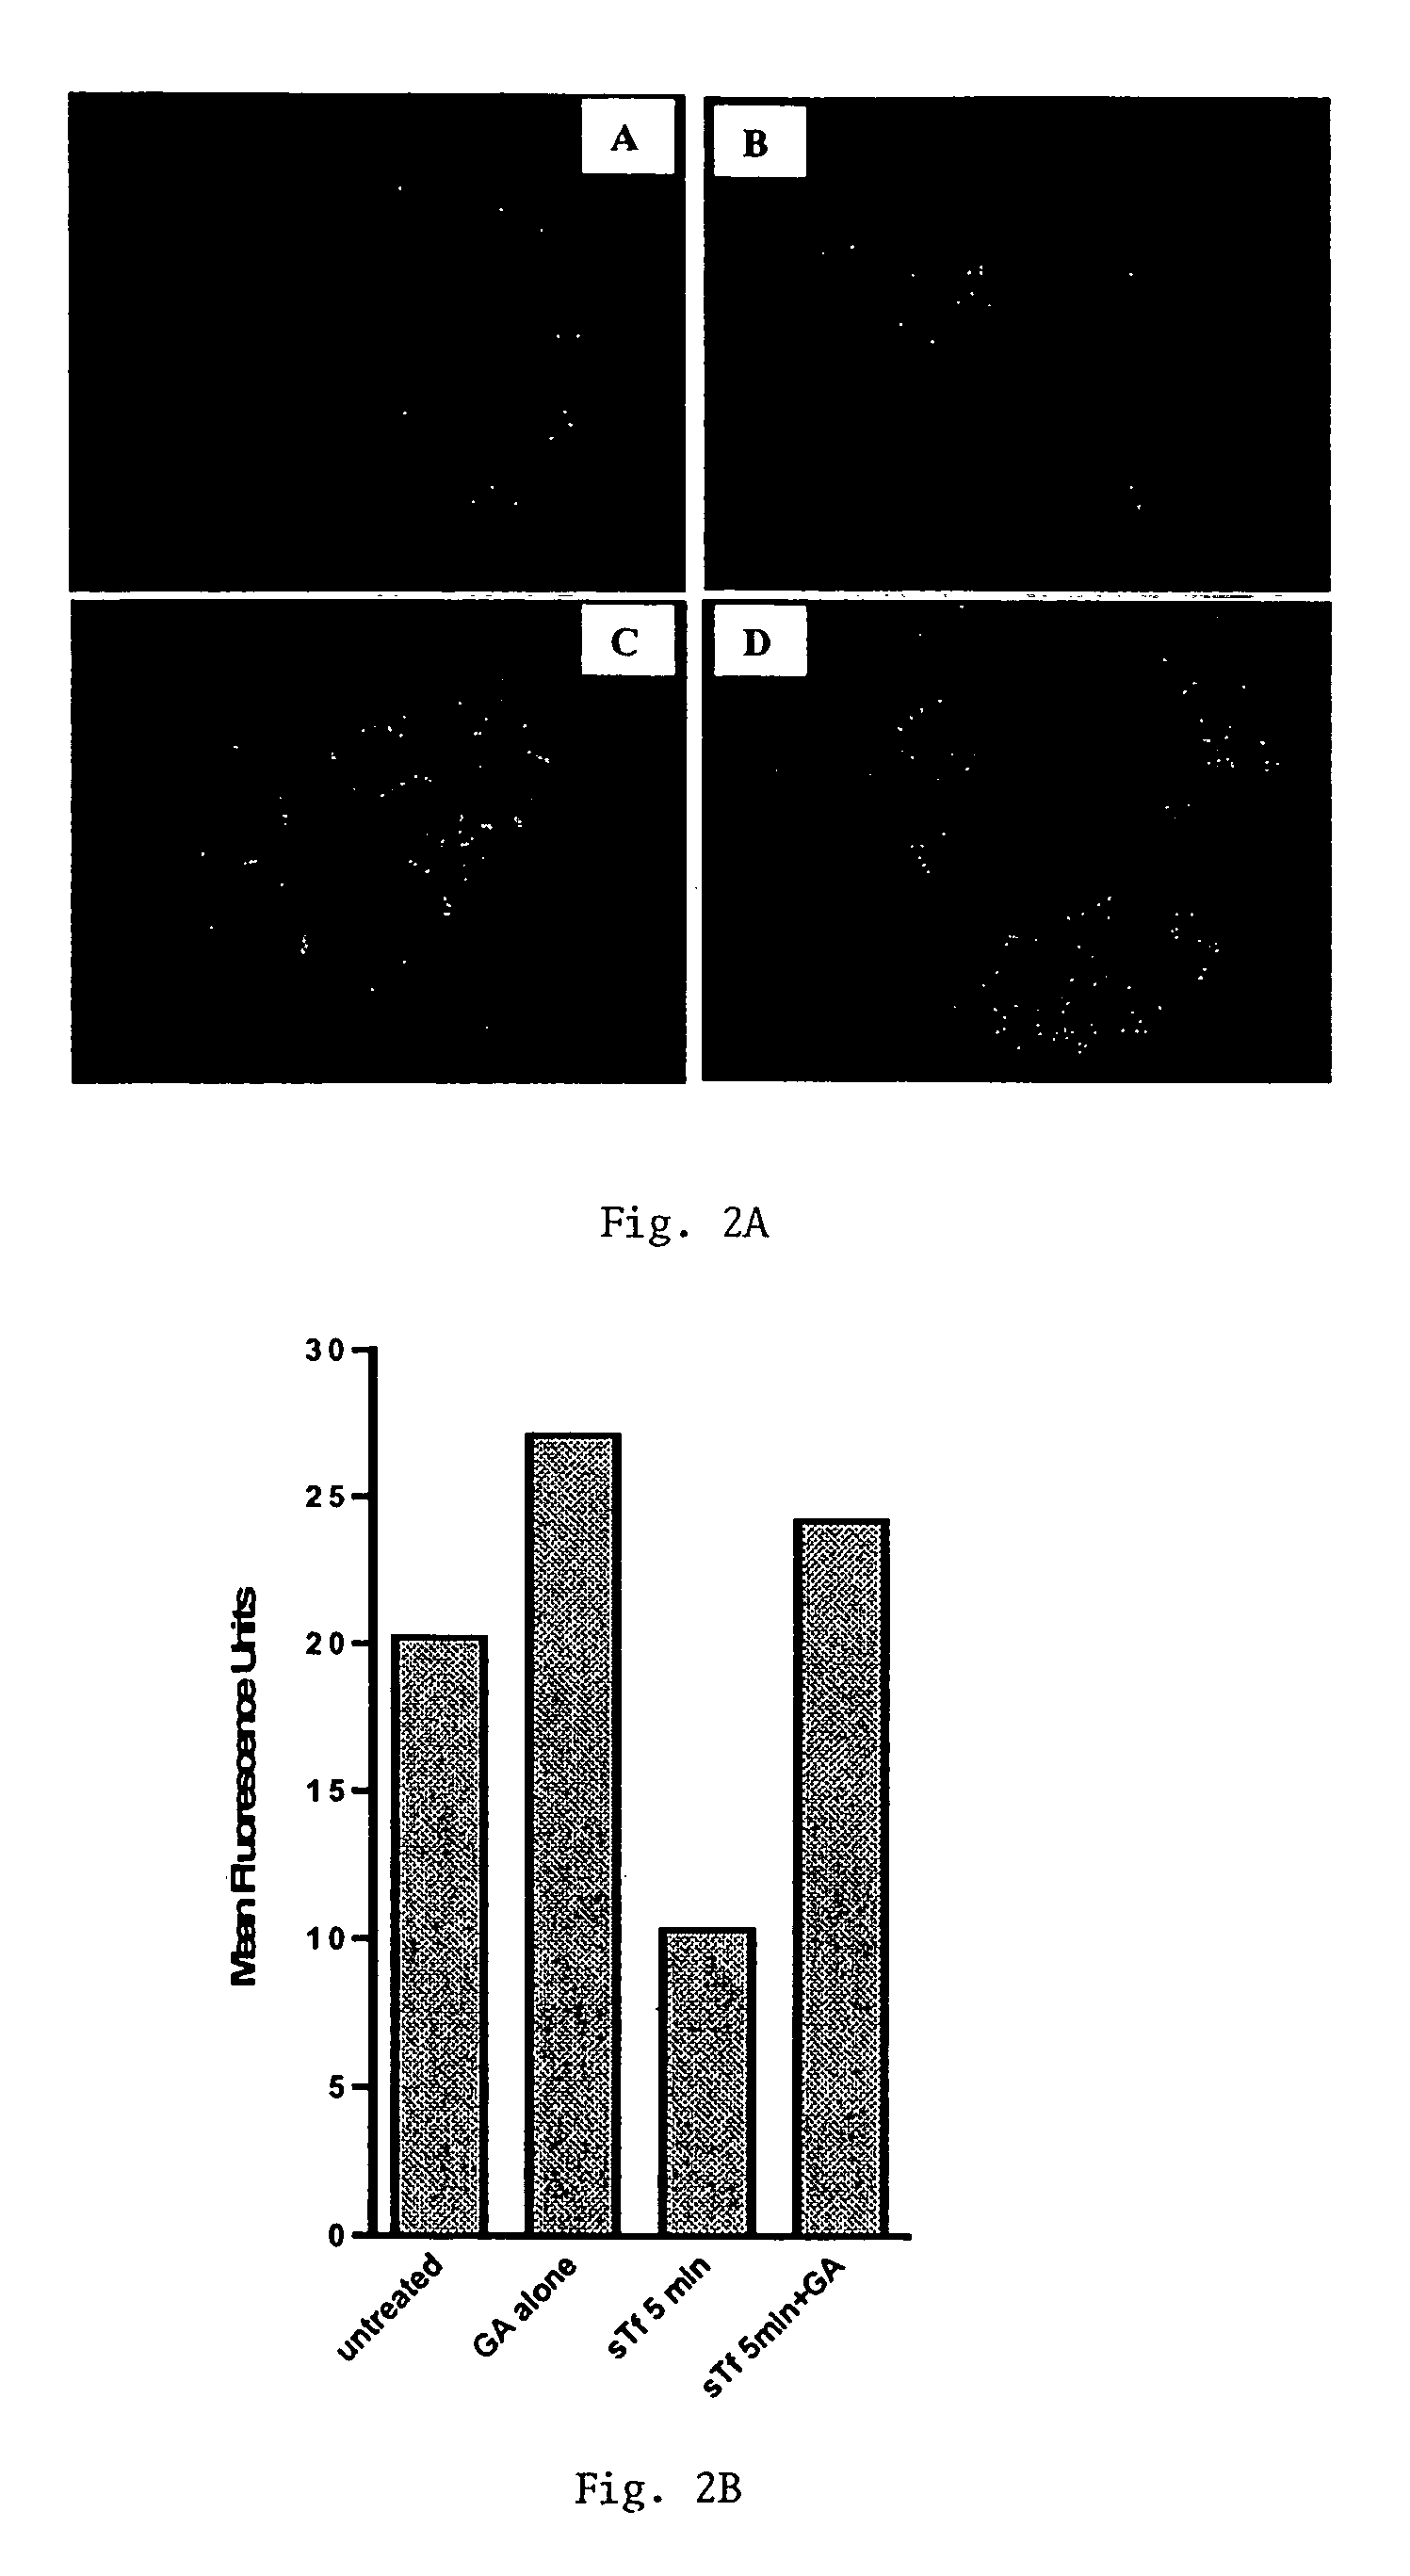 Methods of treating diseases responsive to induction of apoptosis and screening assays